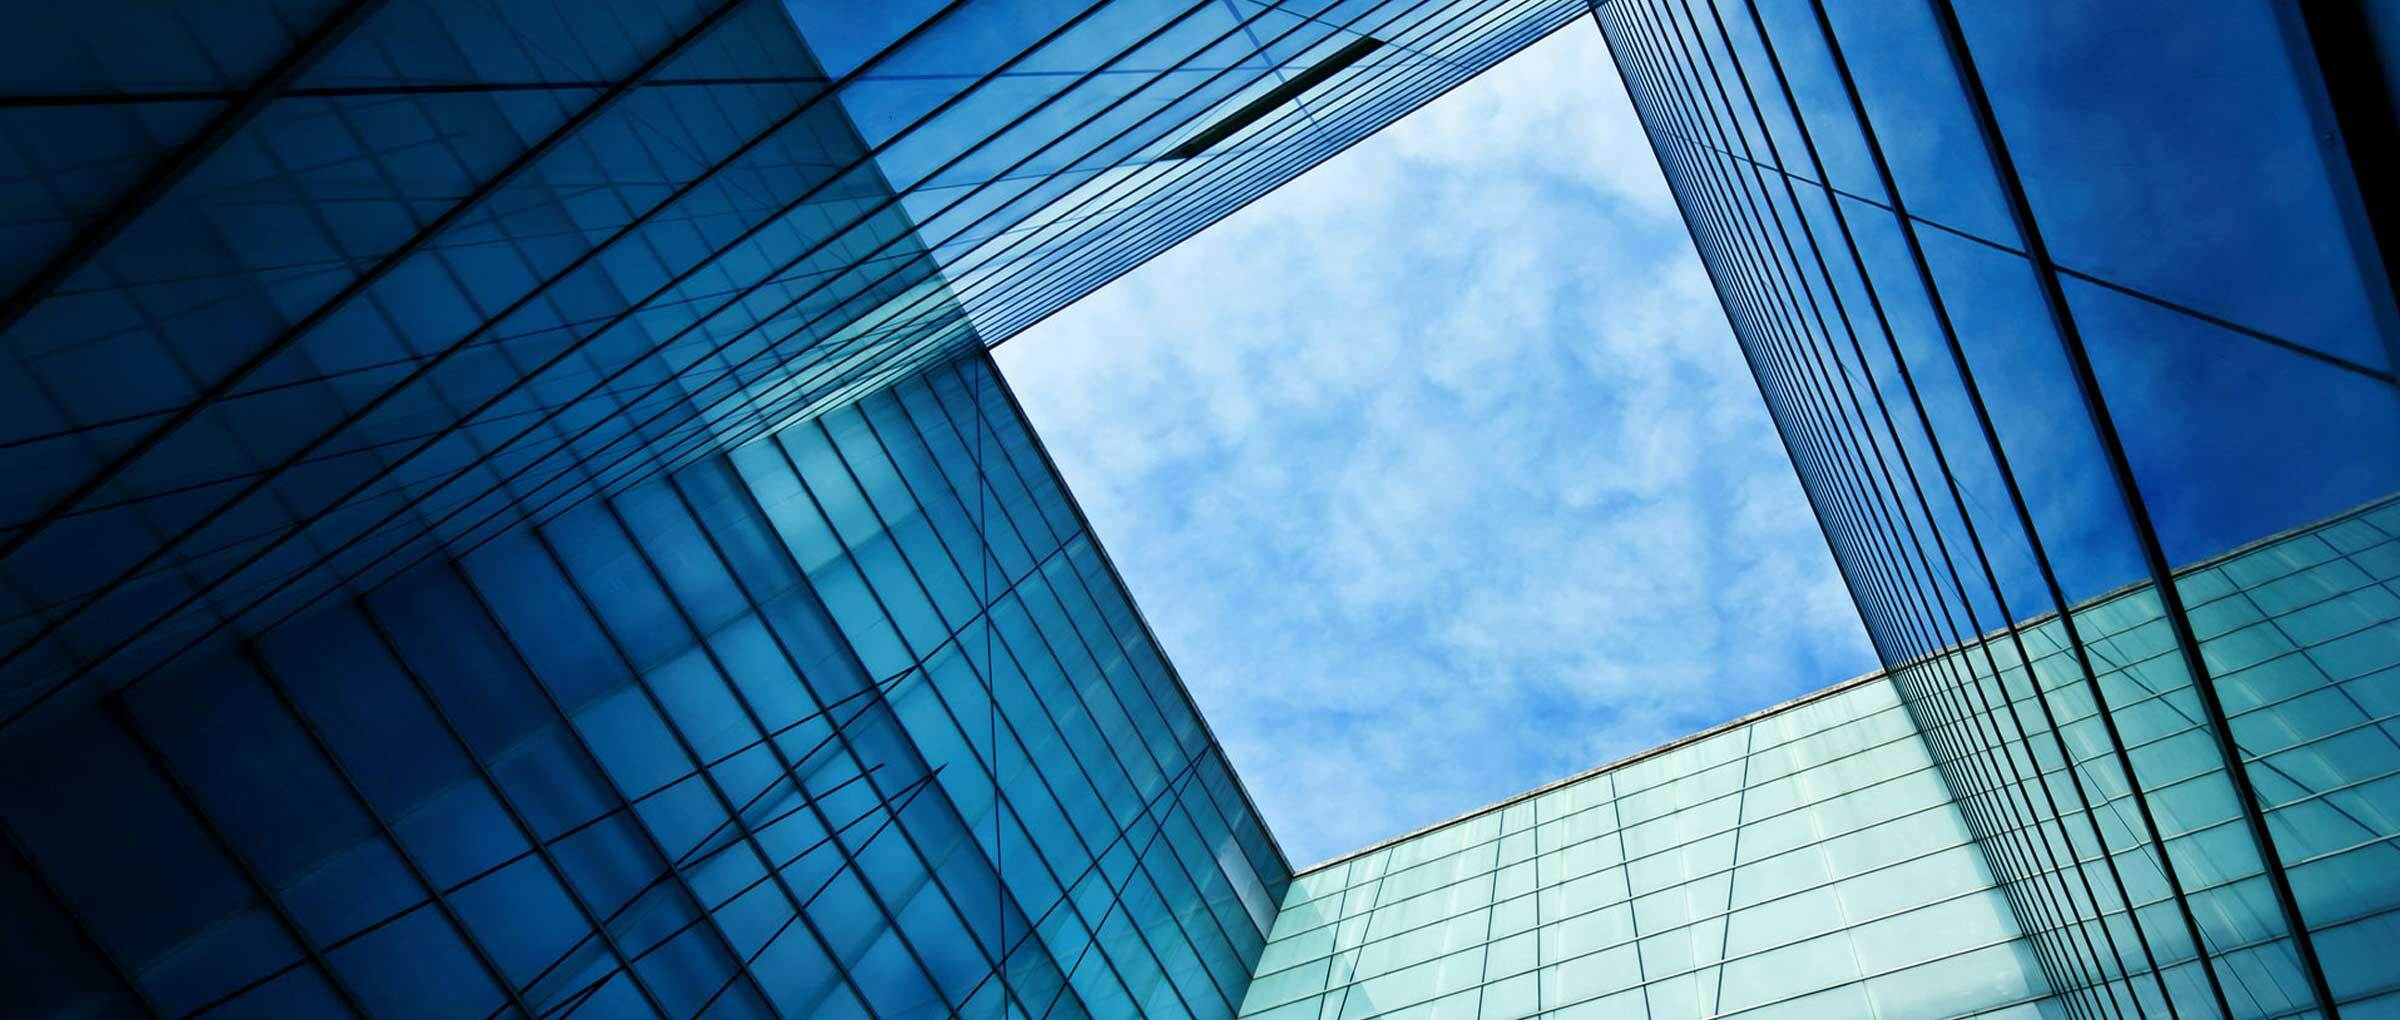 Vertical view of a glass building